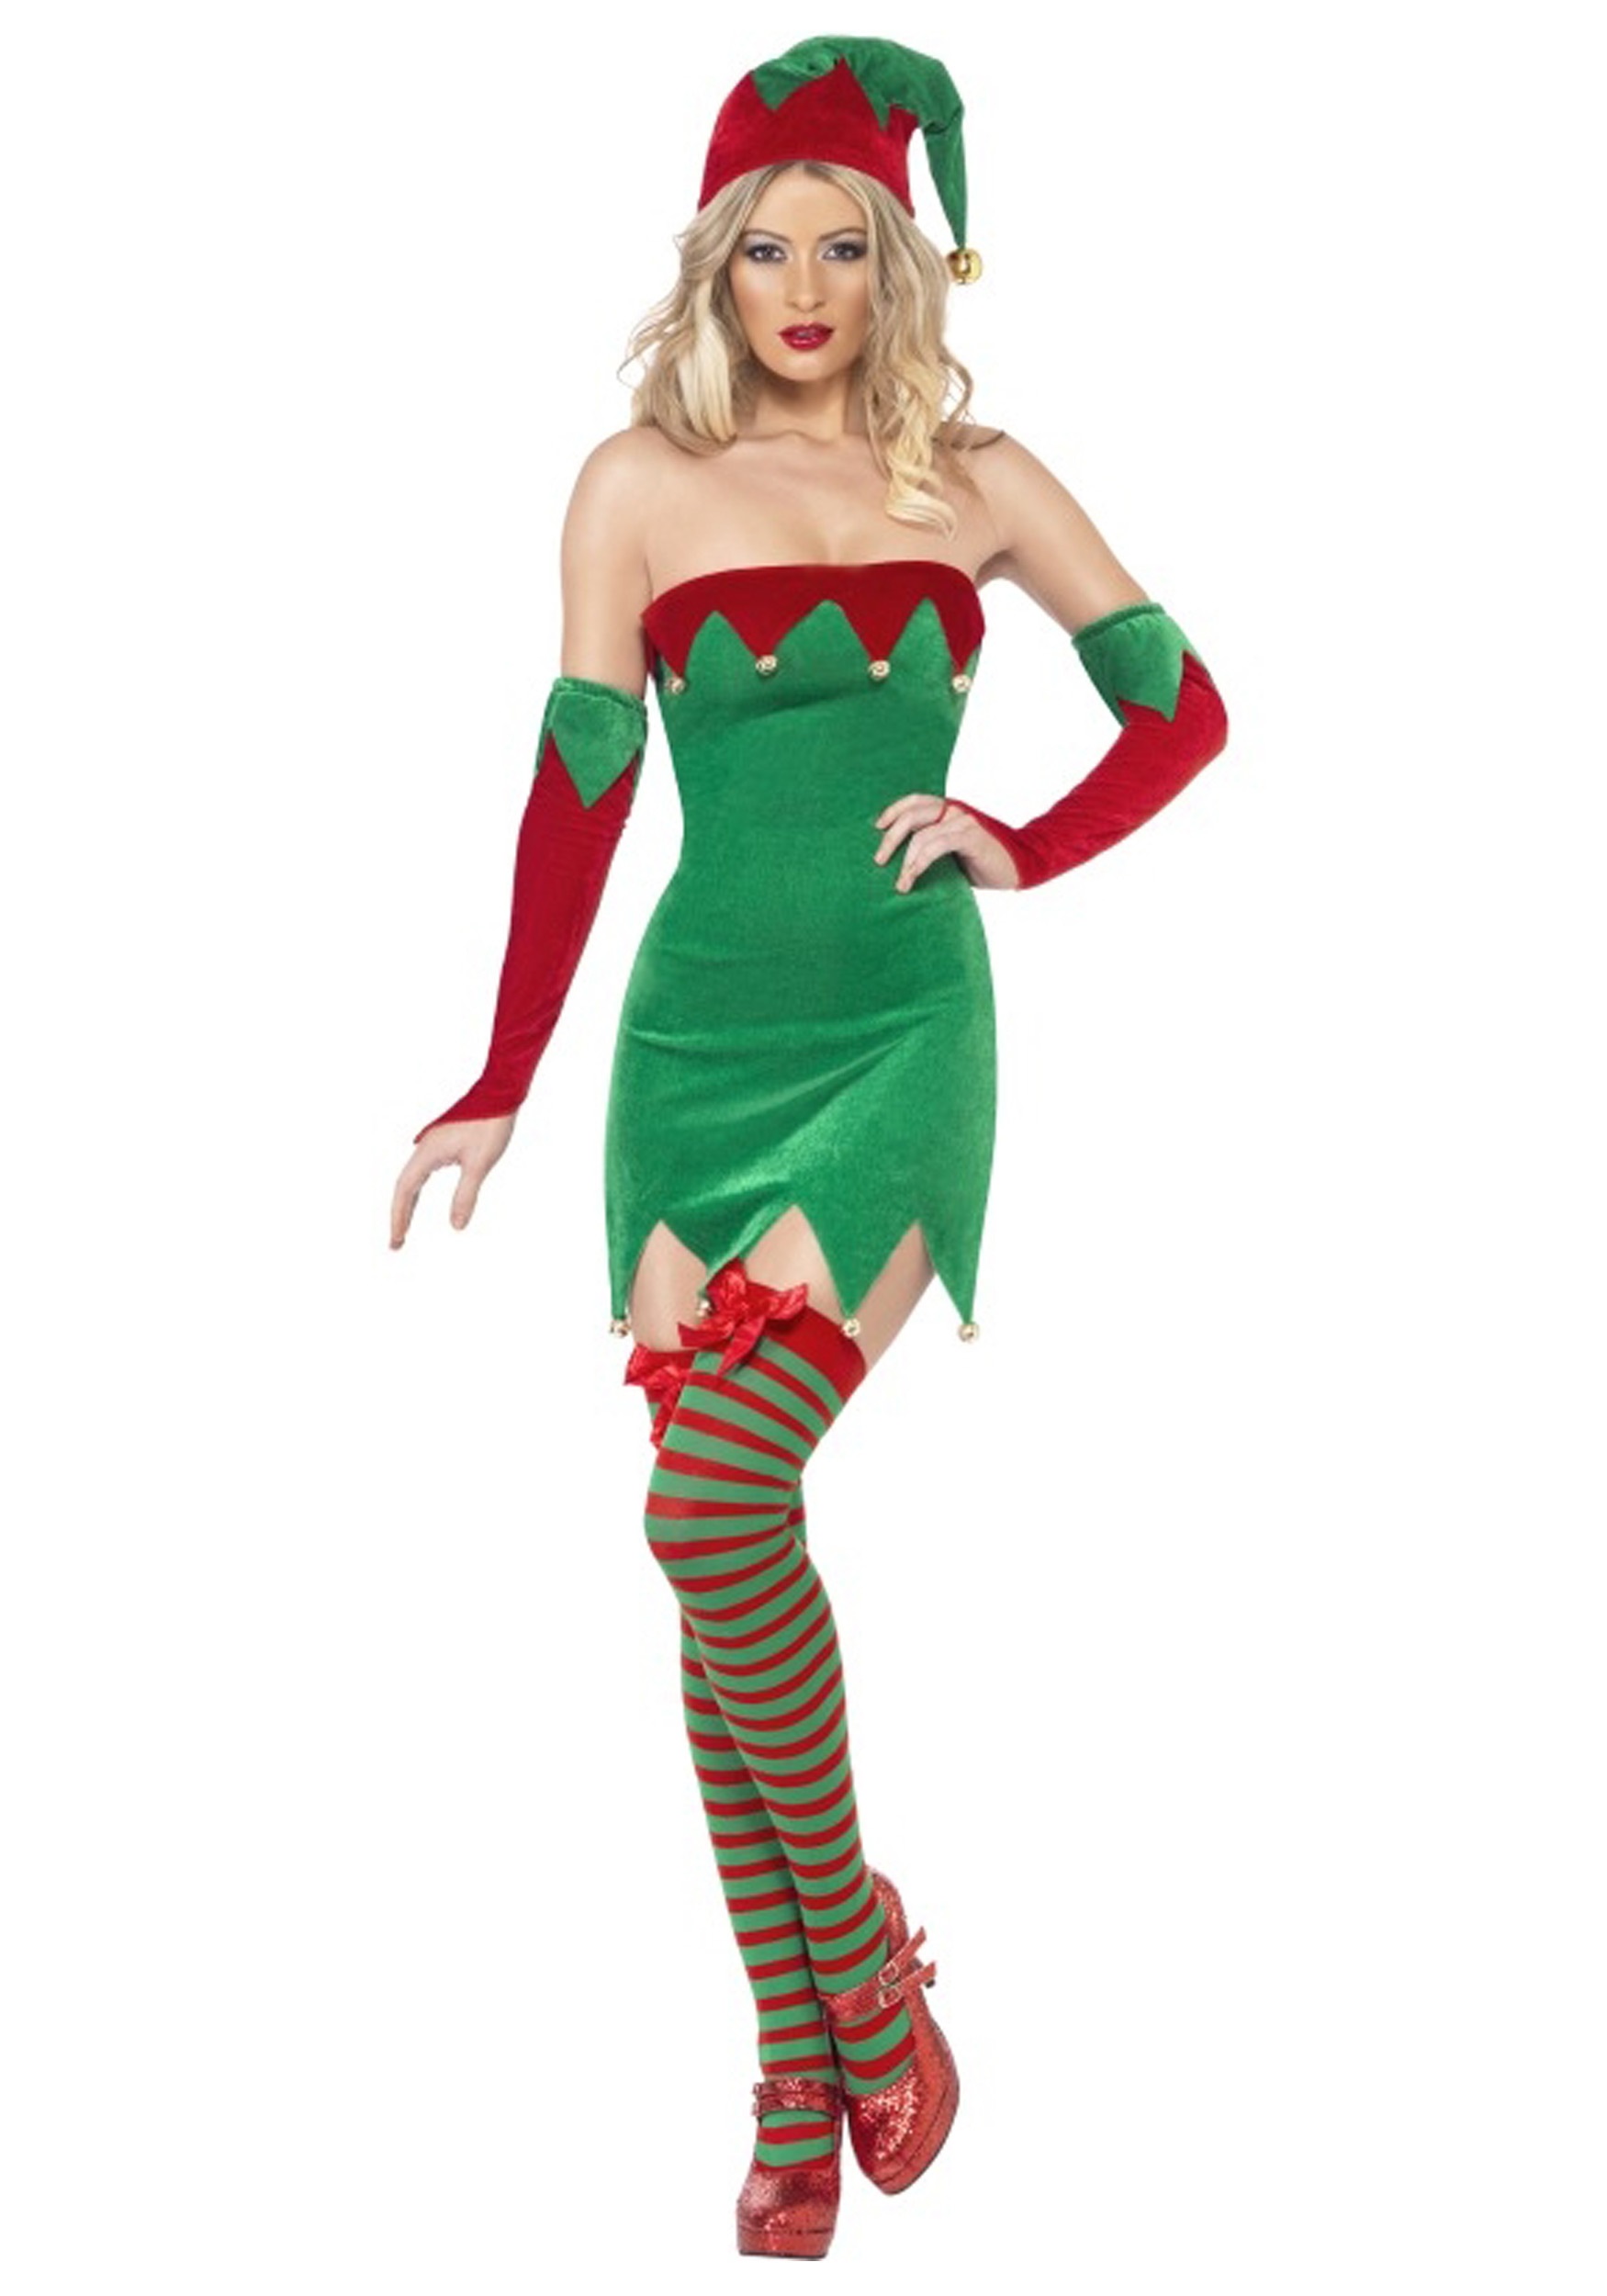 Sexy grinch costume - рџ Ў Buy grinch outfits for adults OFF-66.